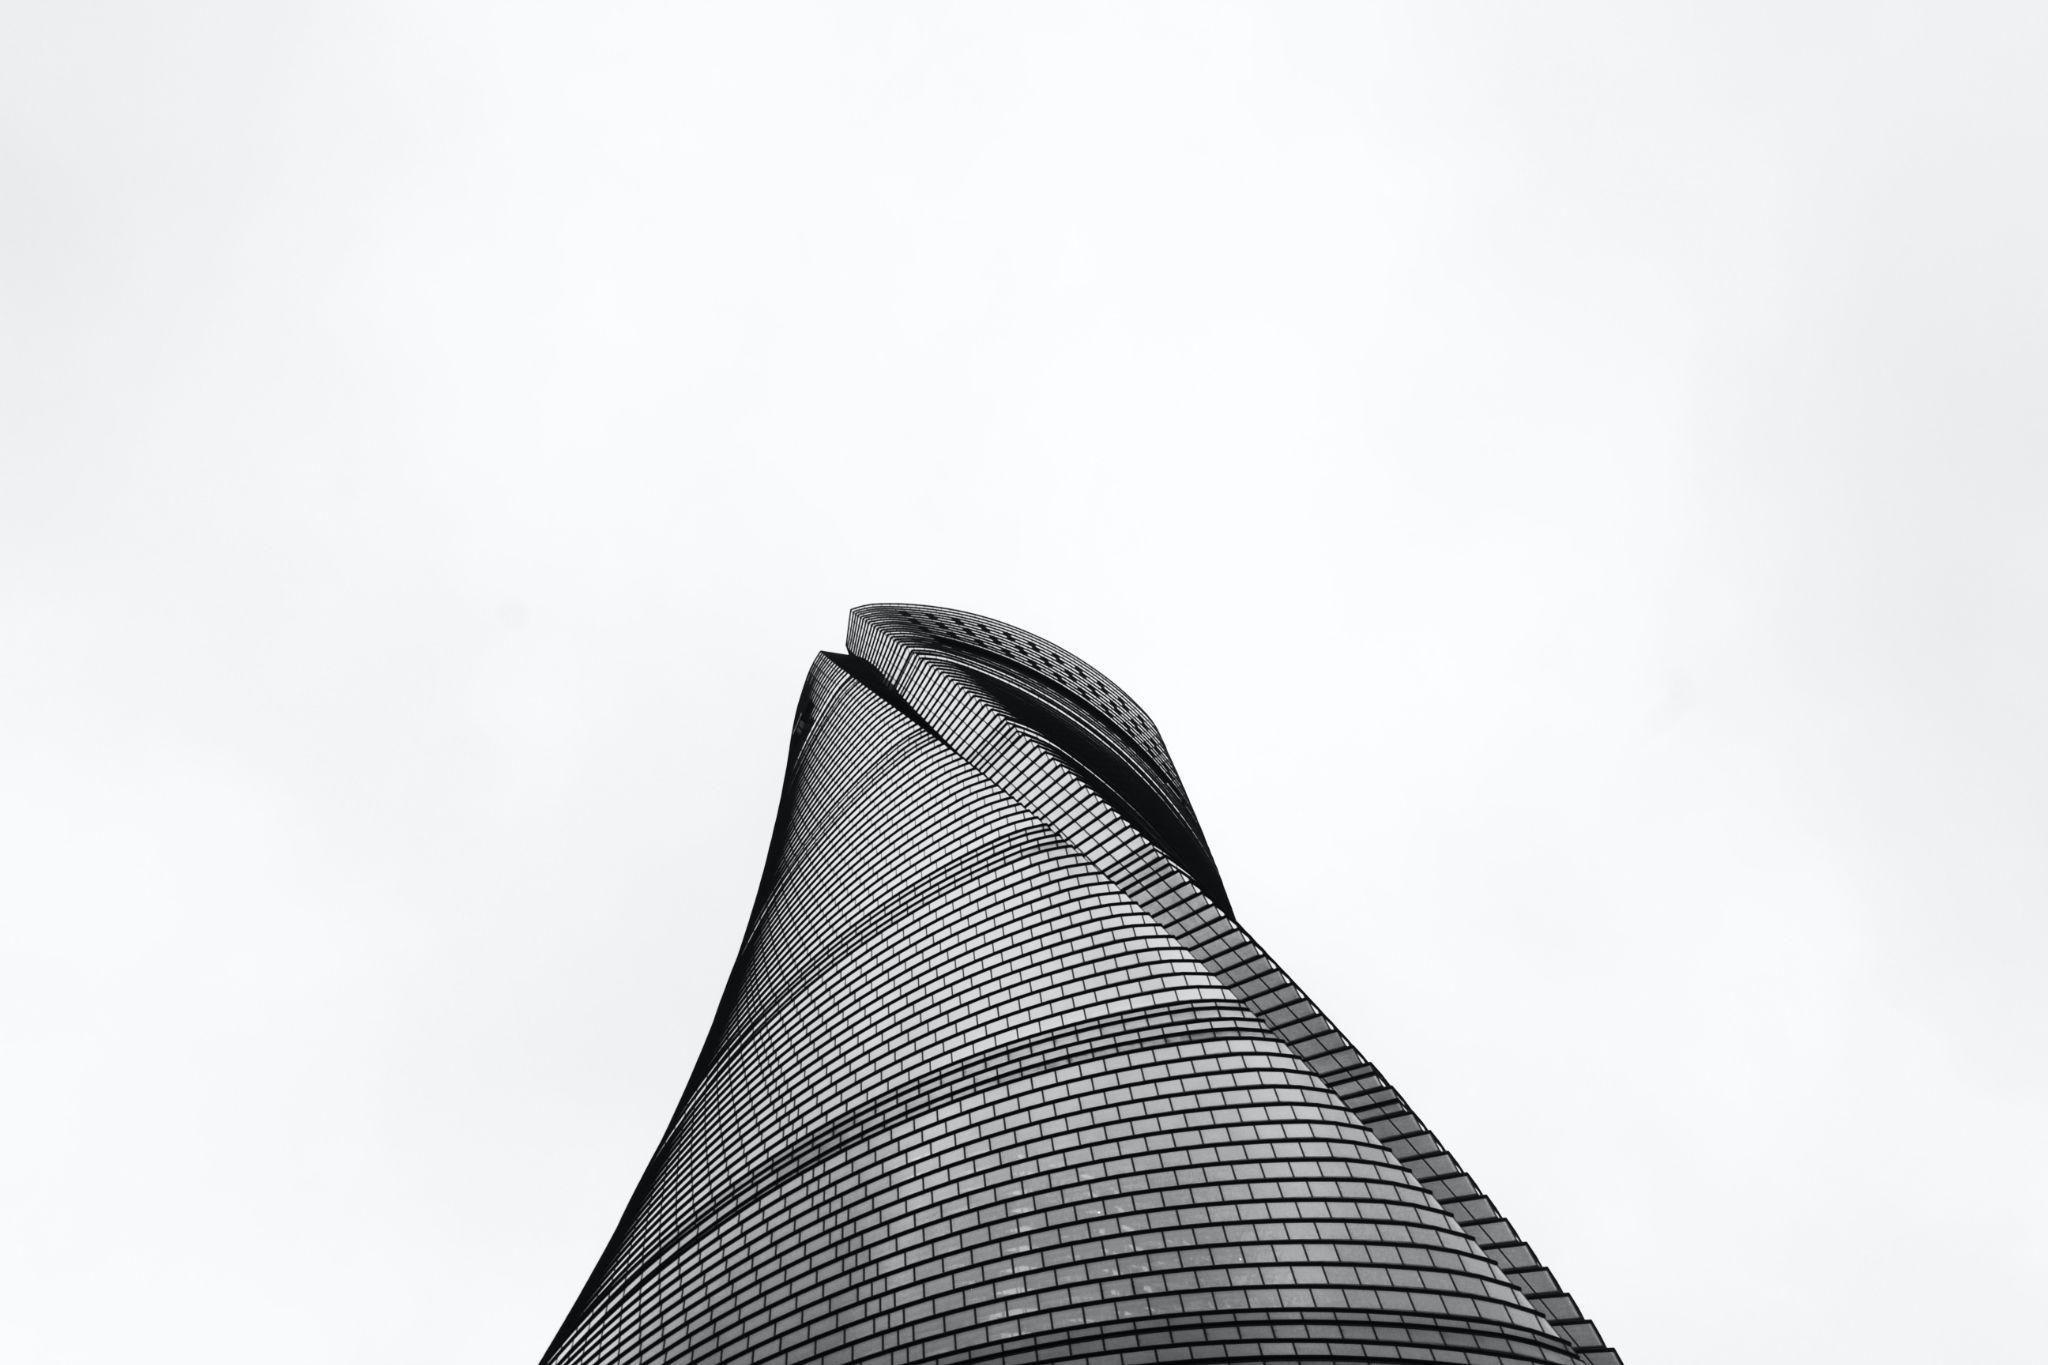 Shanghai Tower, a sustainable and earthquake-resistant skyscraper